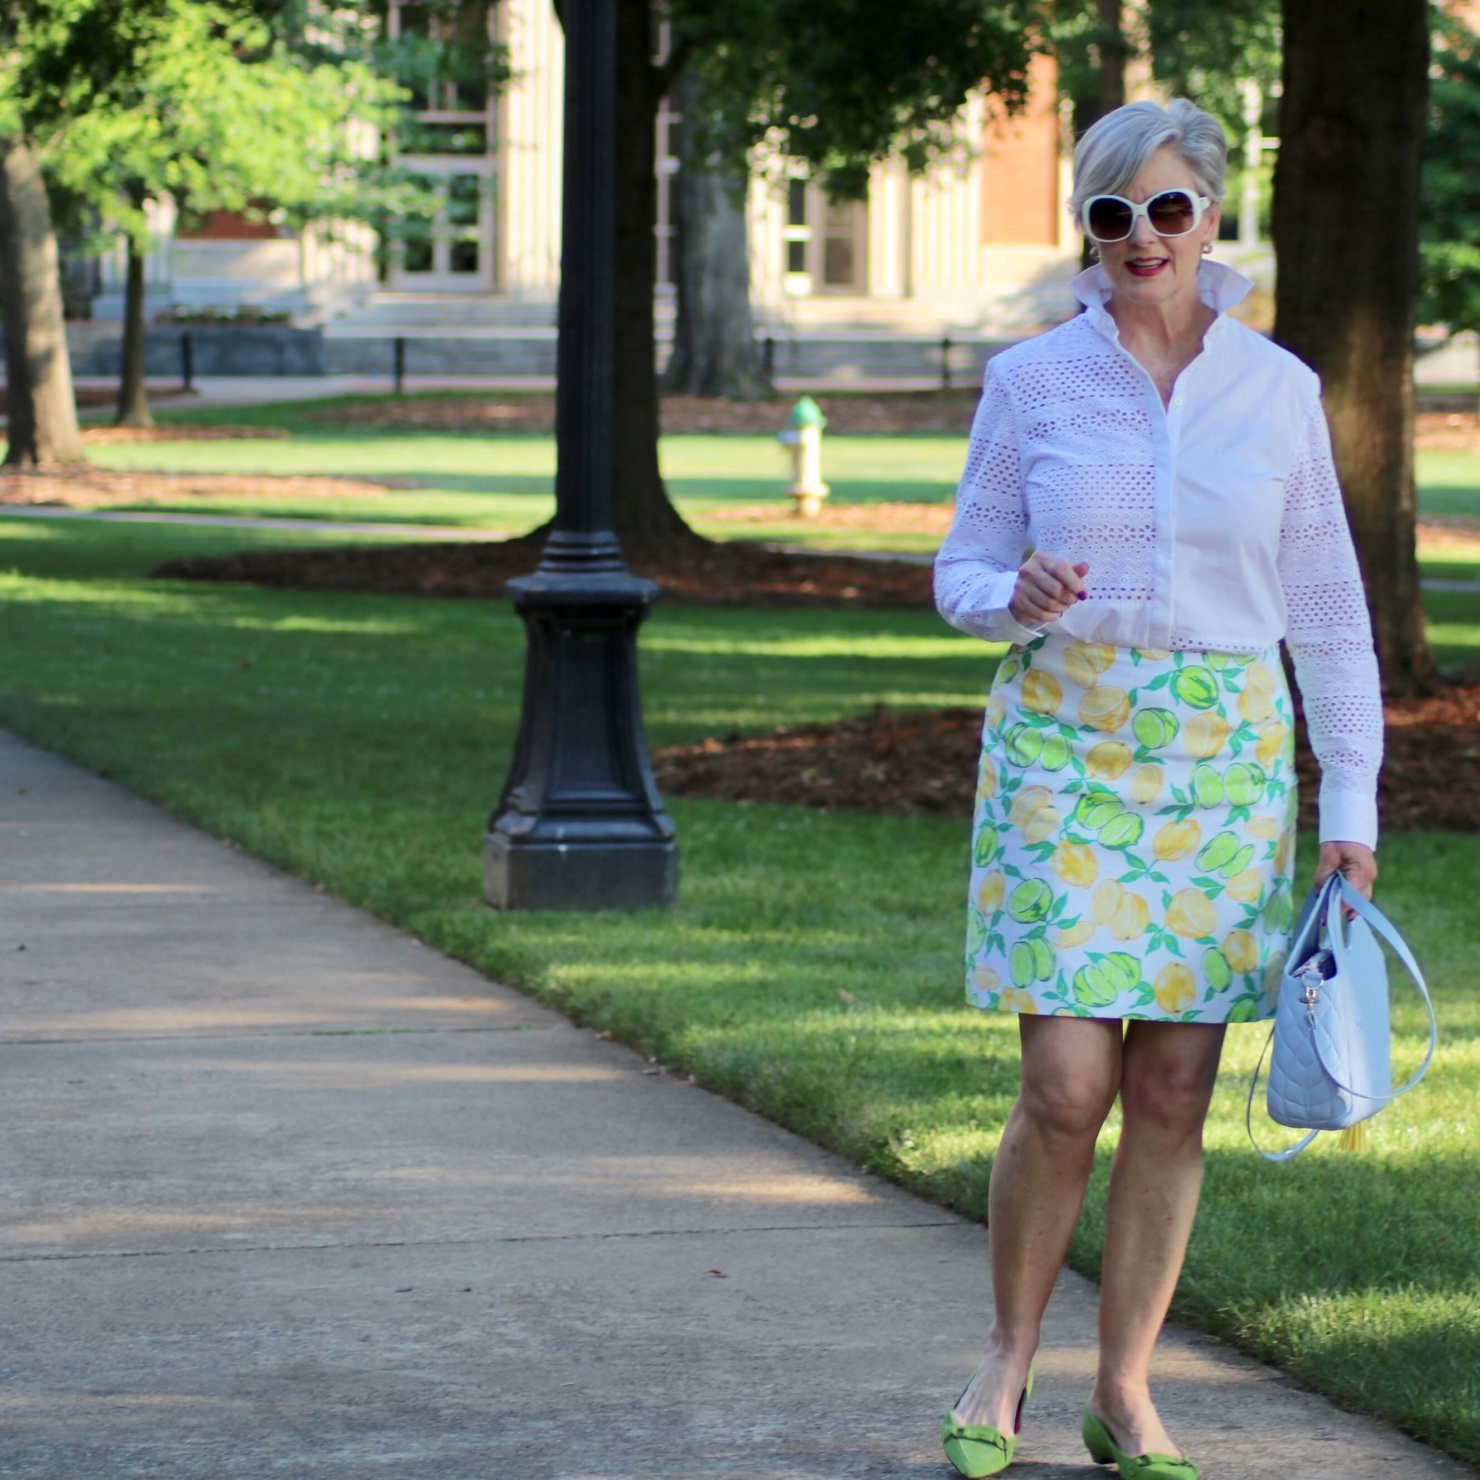 beth from Style at a Certain Age wears a lemon print skirt, eyelet blouse, pointy-toed flats and o-bag